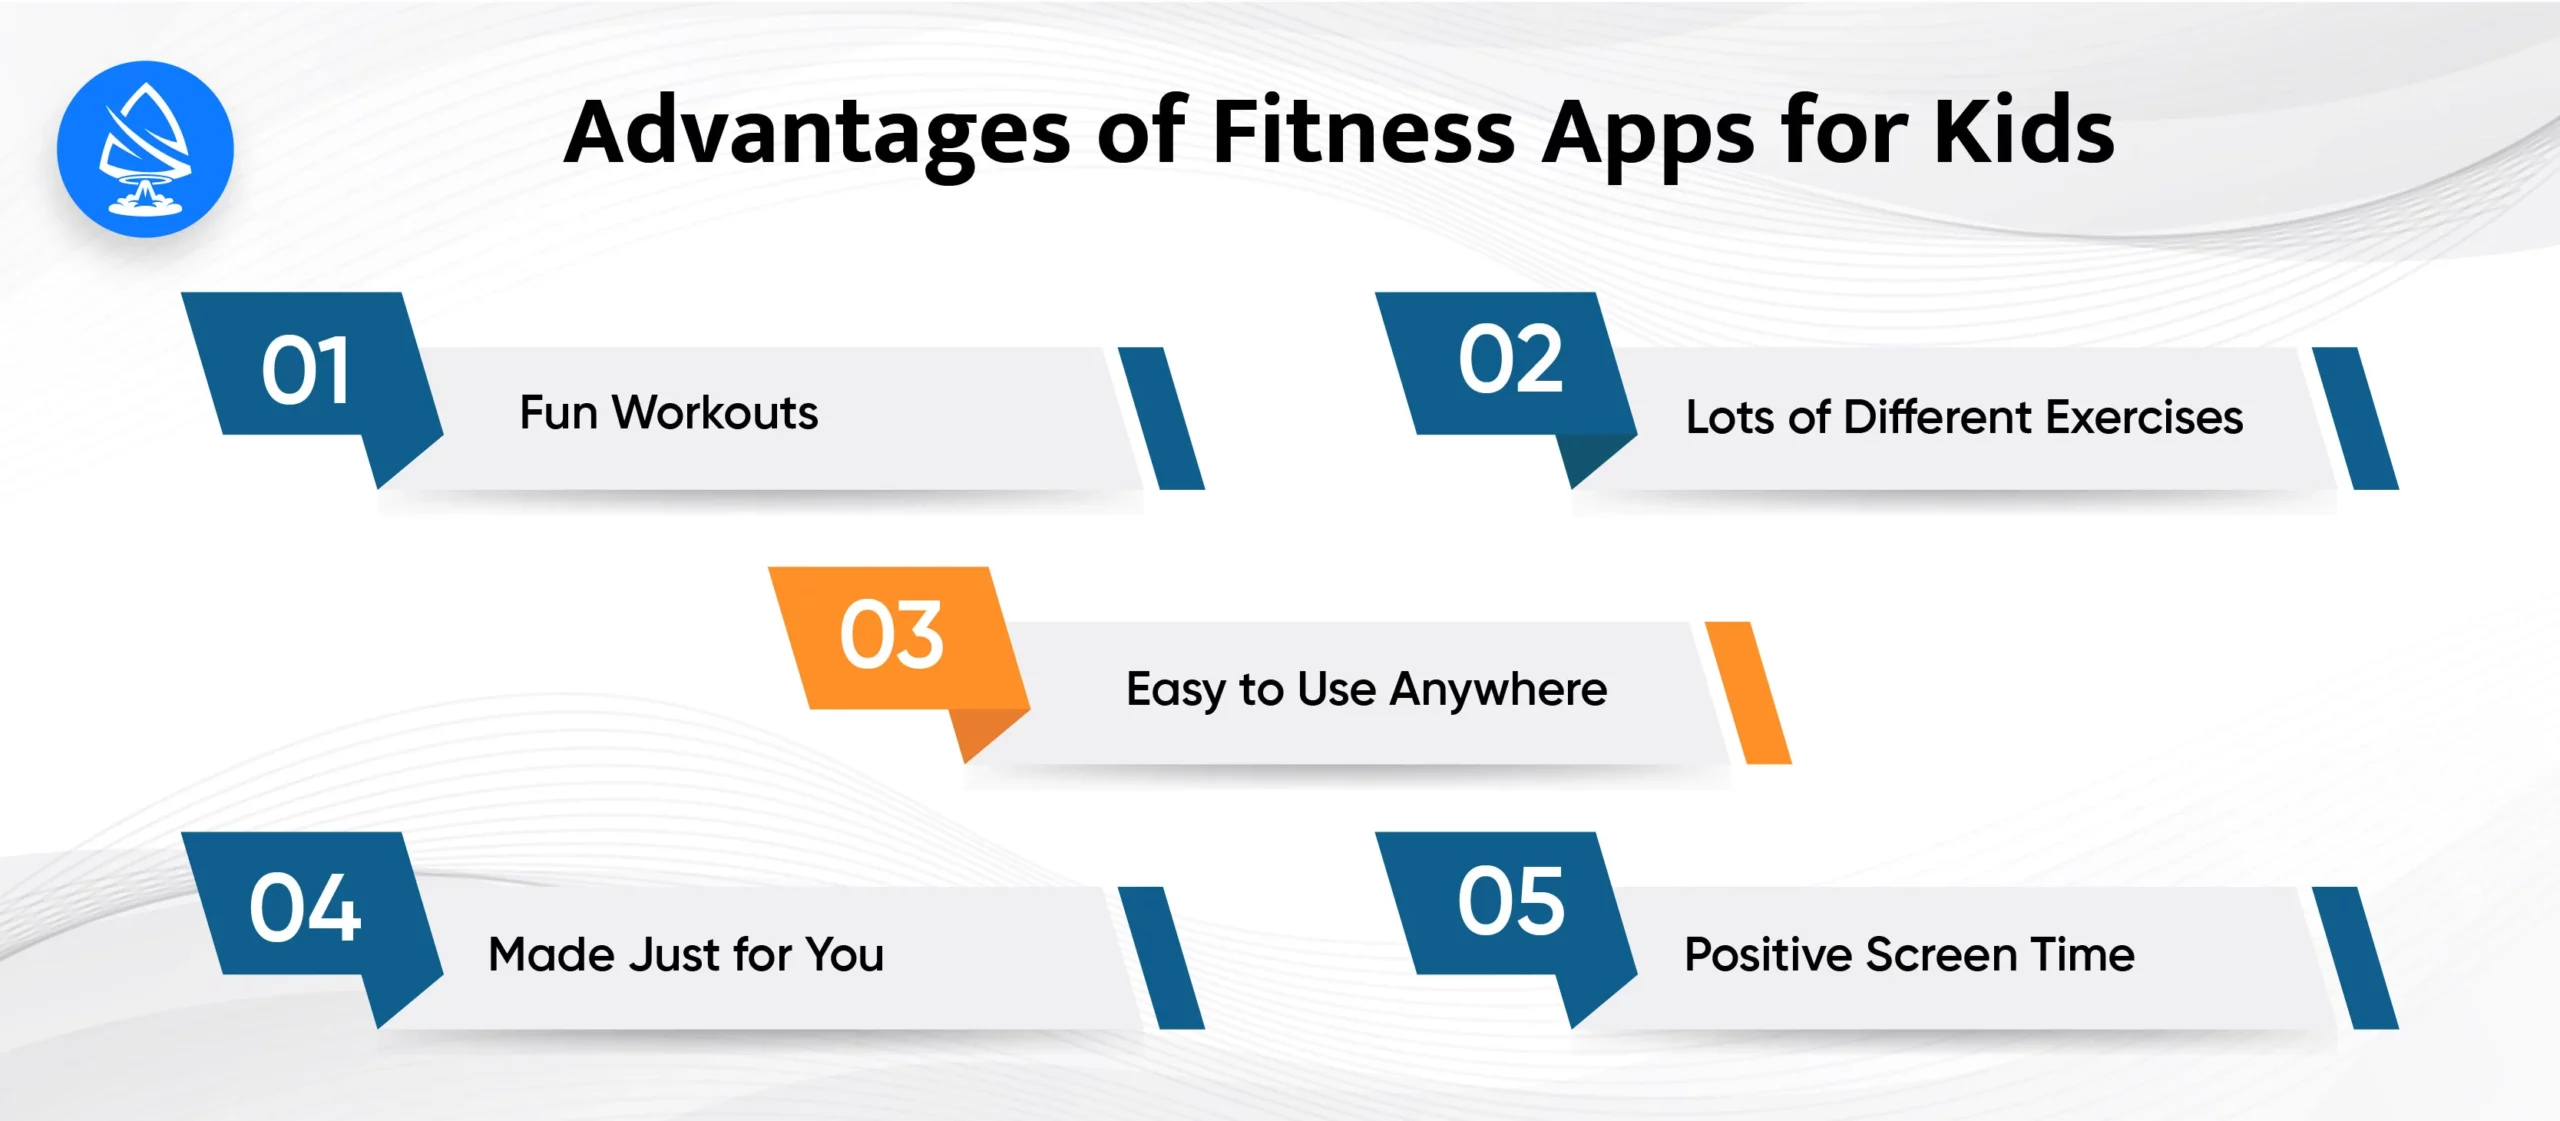 The Advantages of Fitness Apps for Kids